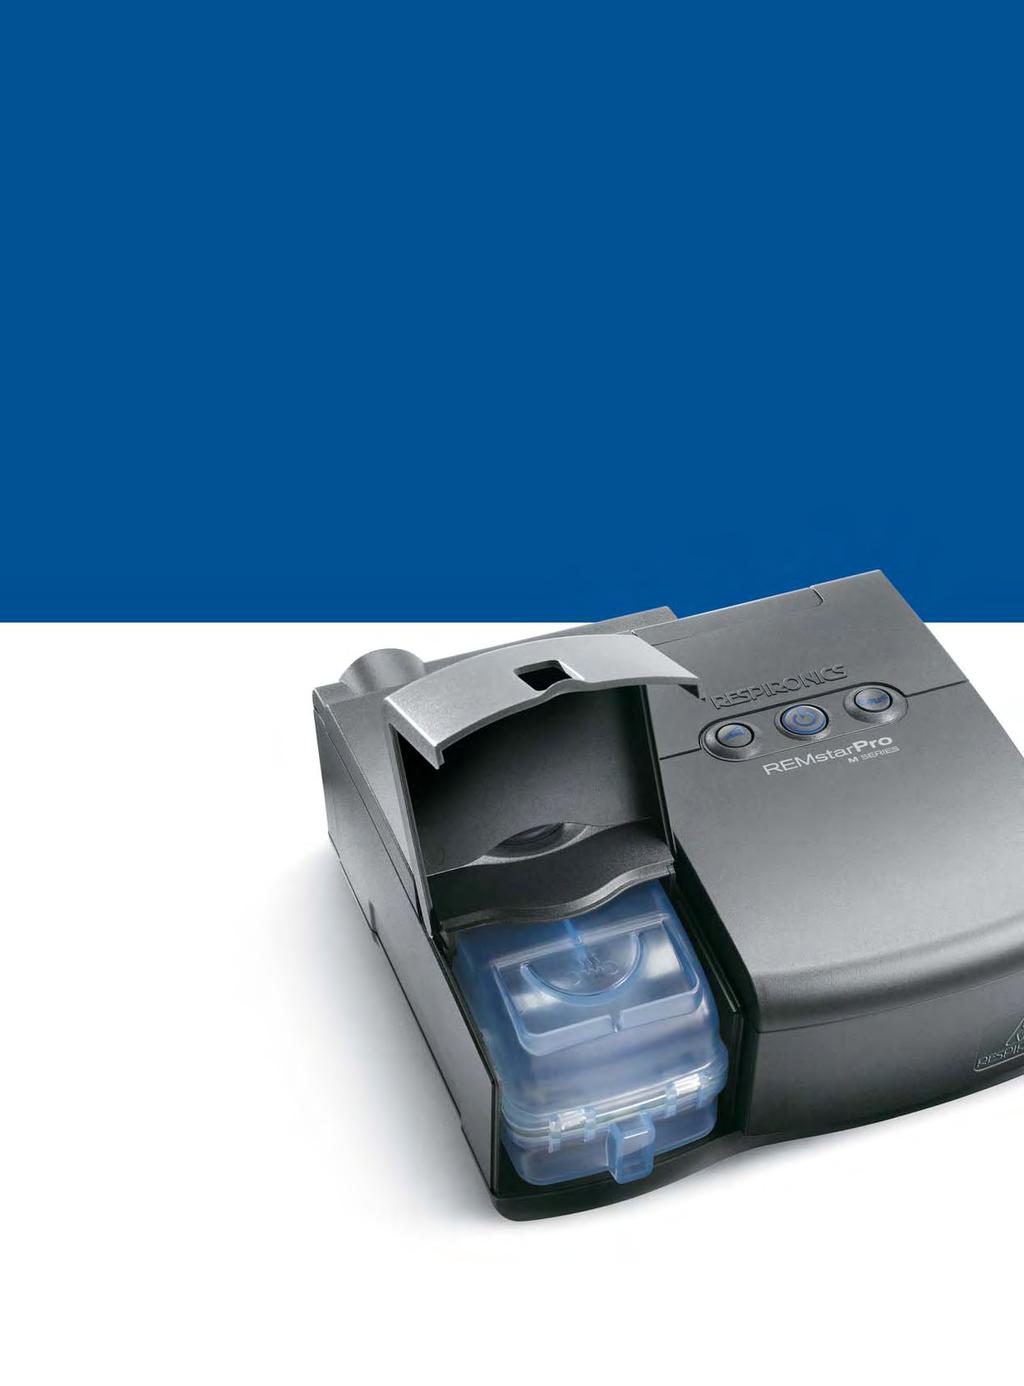 REMSTAR PLUS WITH C-FLEX The REMstar Plus M Series with C-Flex offers optional integrated humidification, optional Encore Pro SmartCard capability for basic compliance reporting, lighted